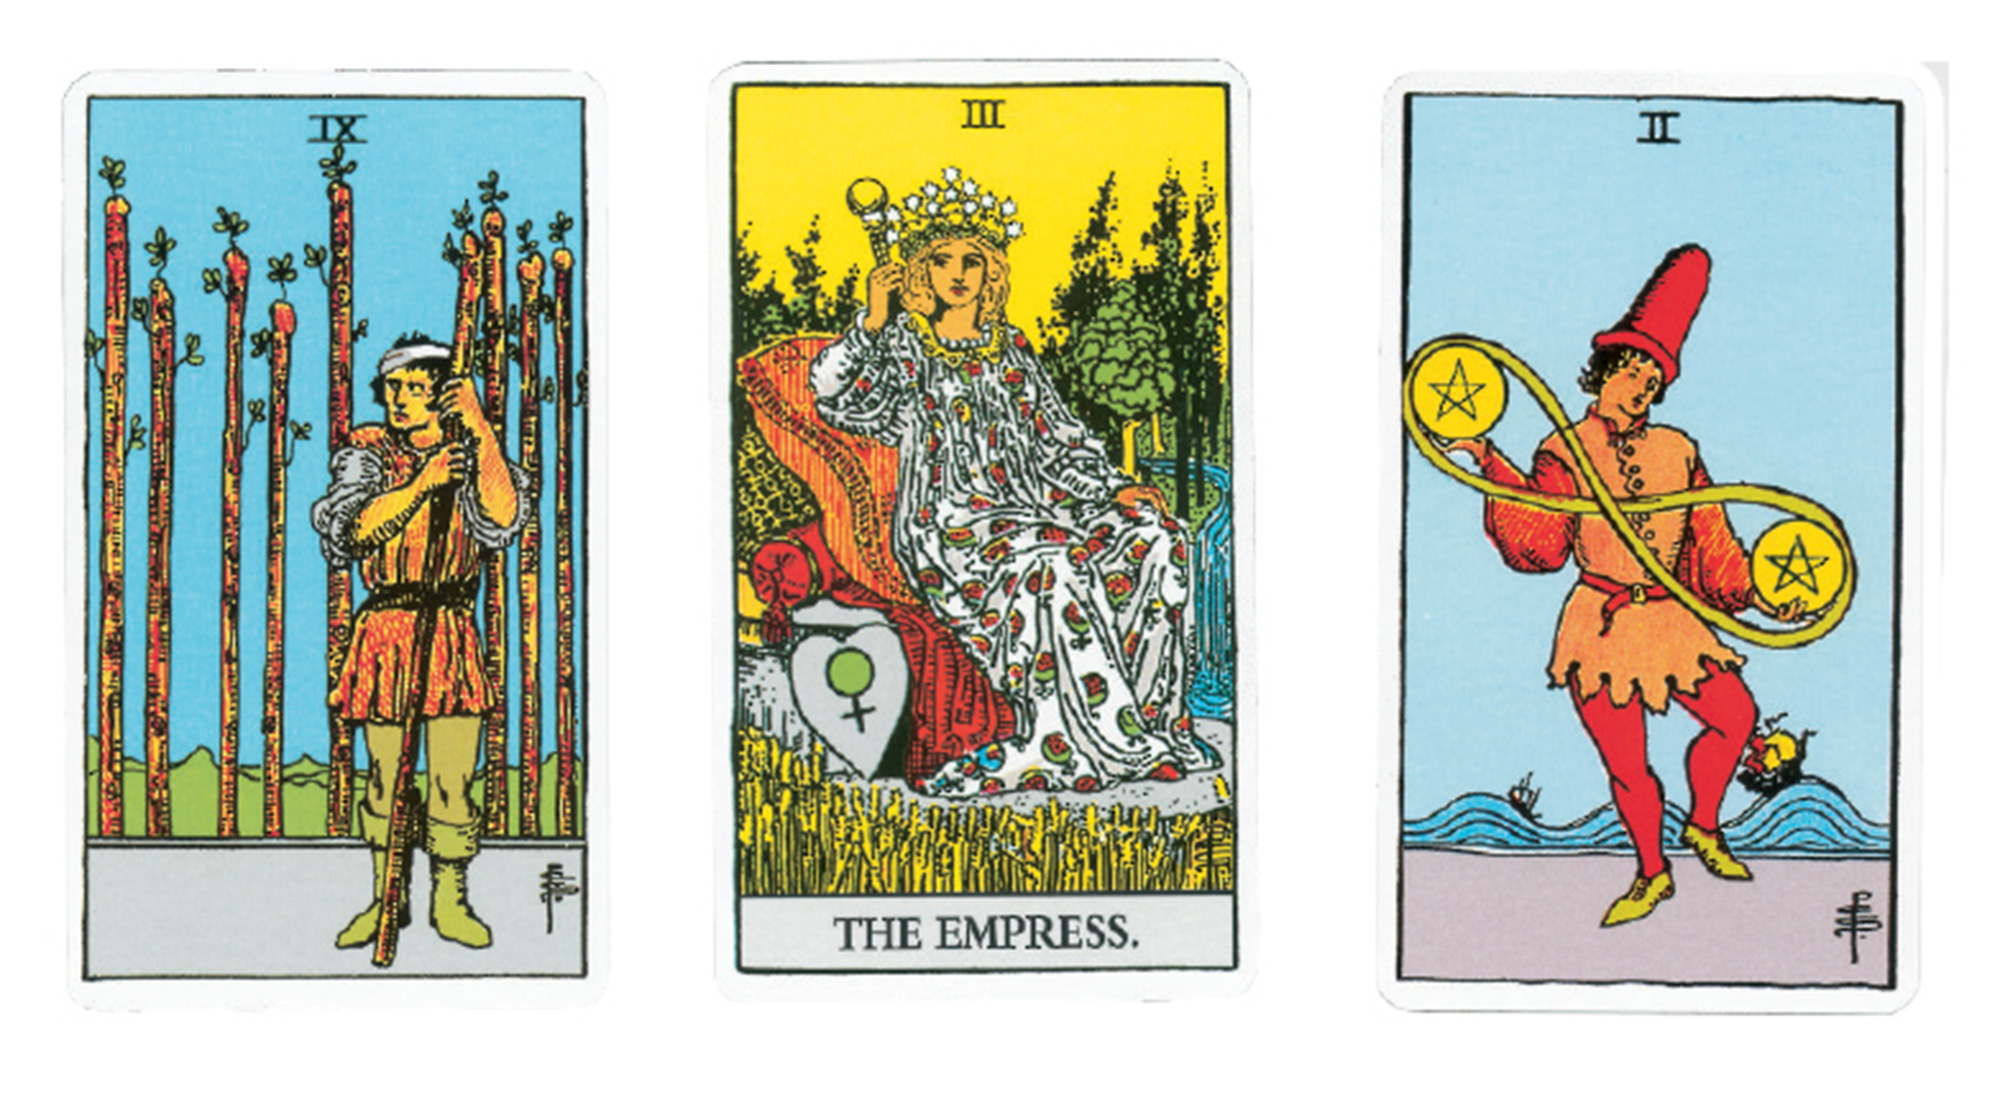 A photograph of three Tarot cards, including “The Empress.”